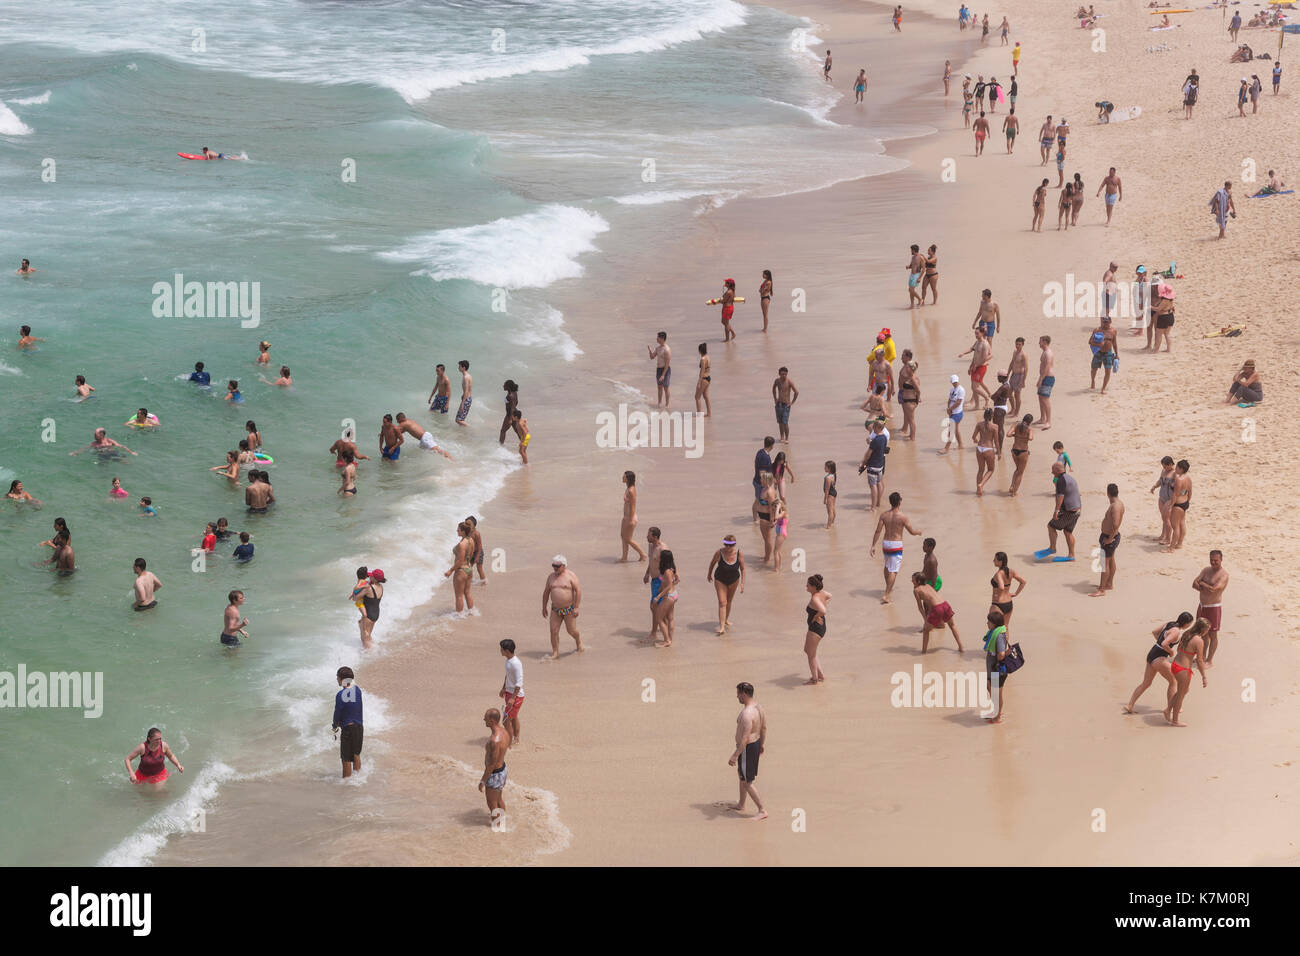 aerial view of people swimming in the sea, Sydney, Australia Stock Photo